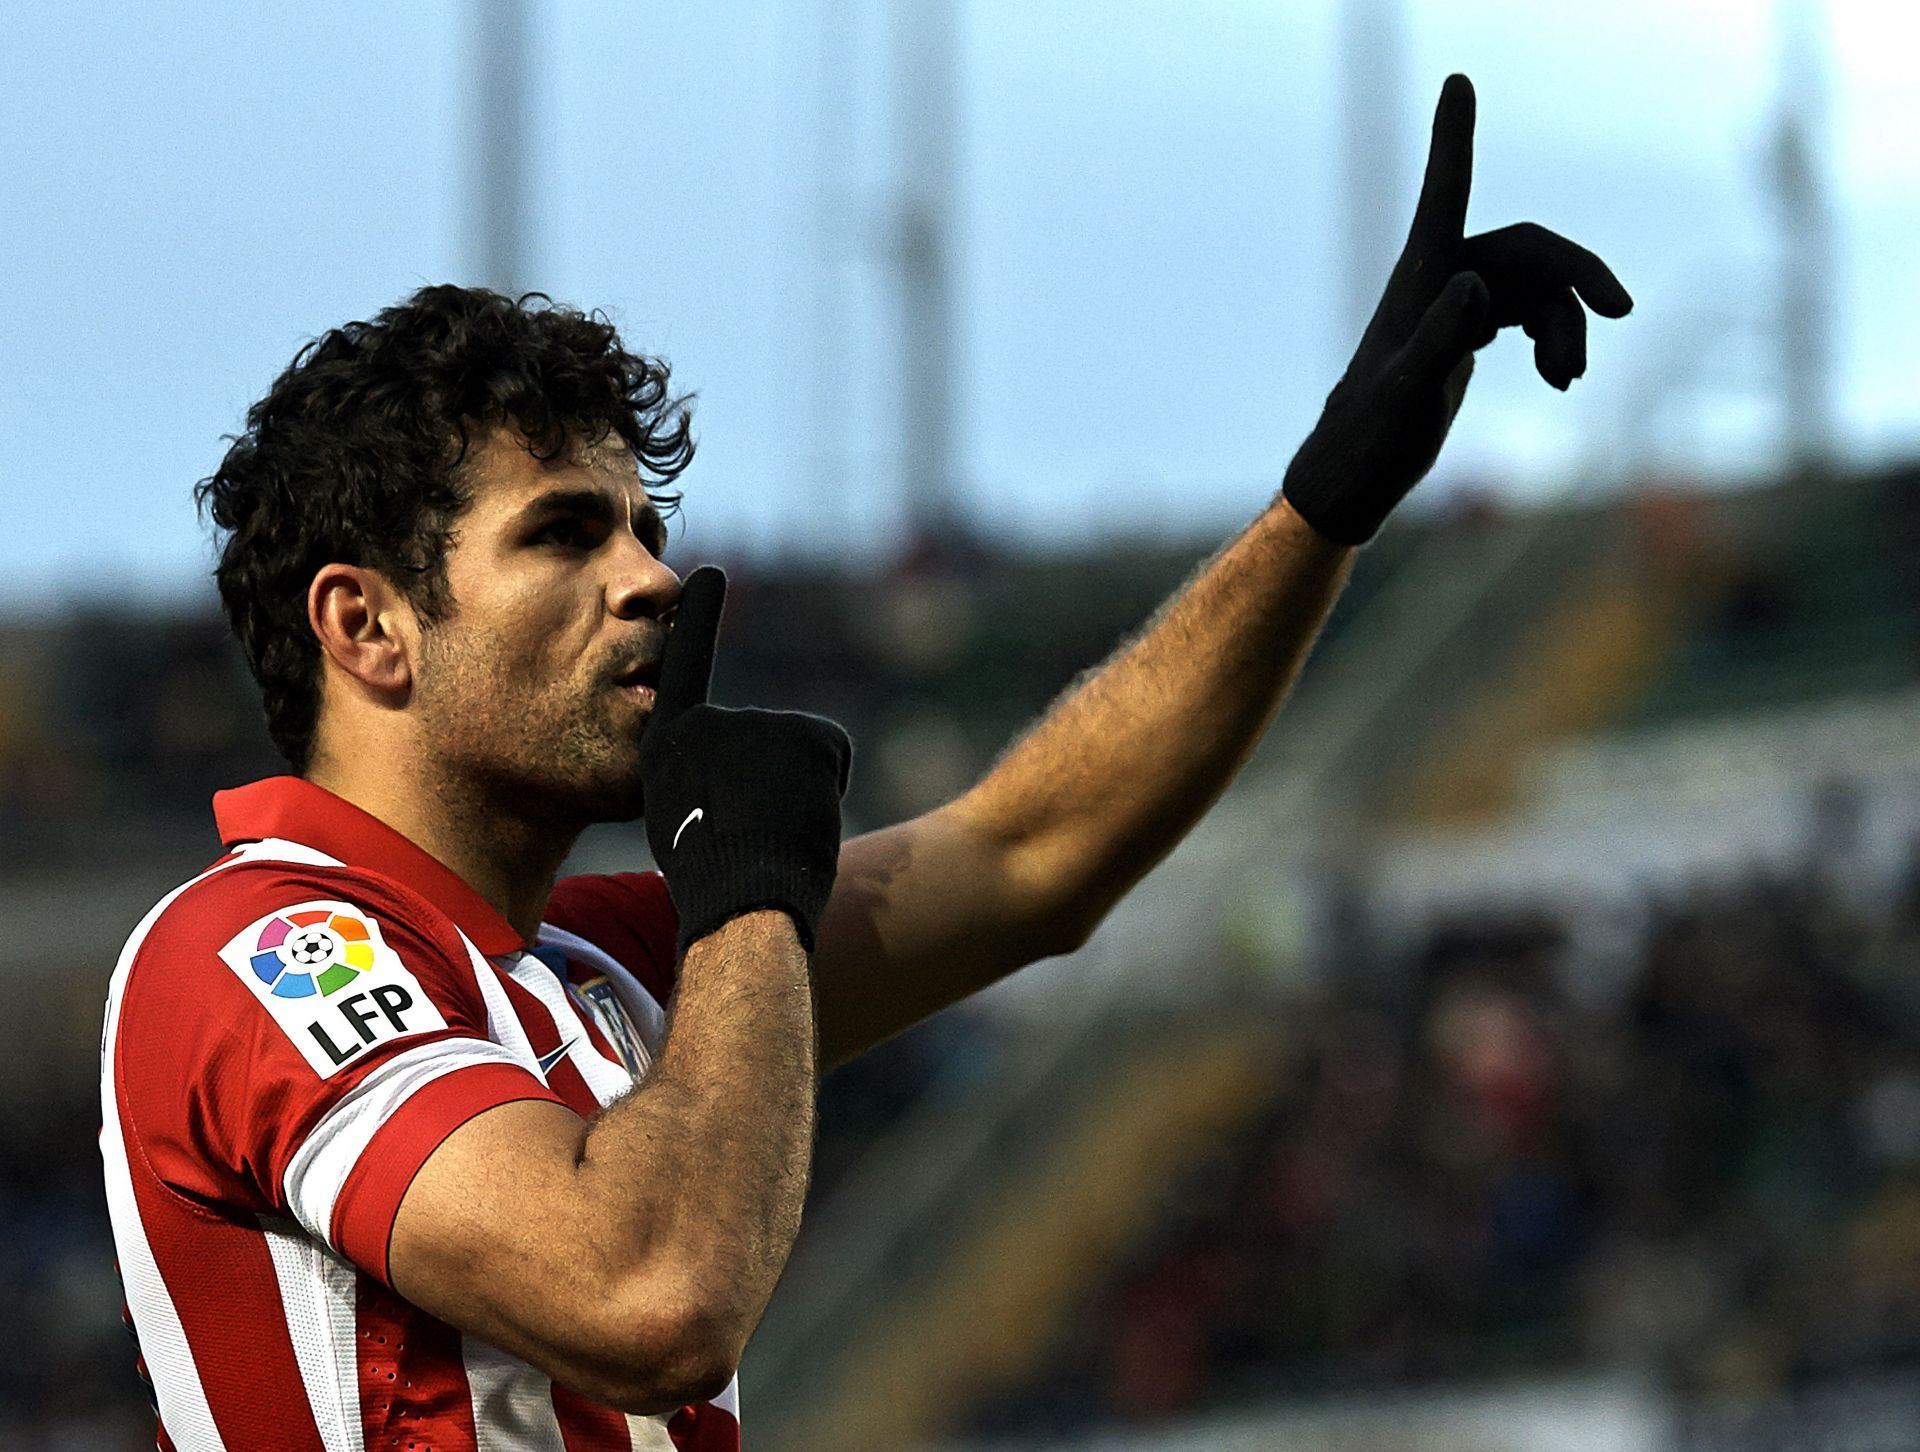 Diego Costa scored on his Champions League debut in 2013.